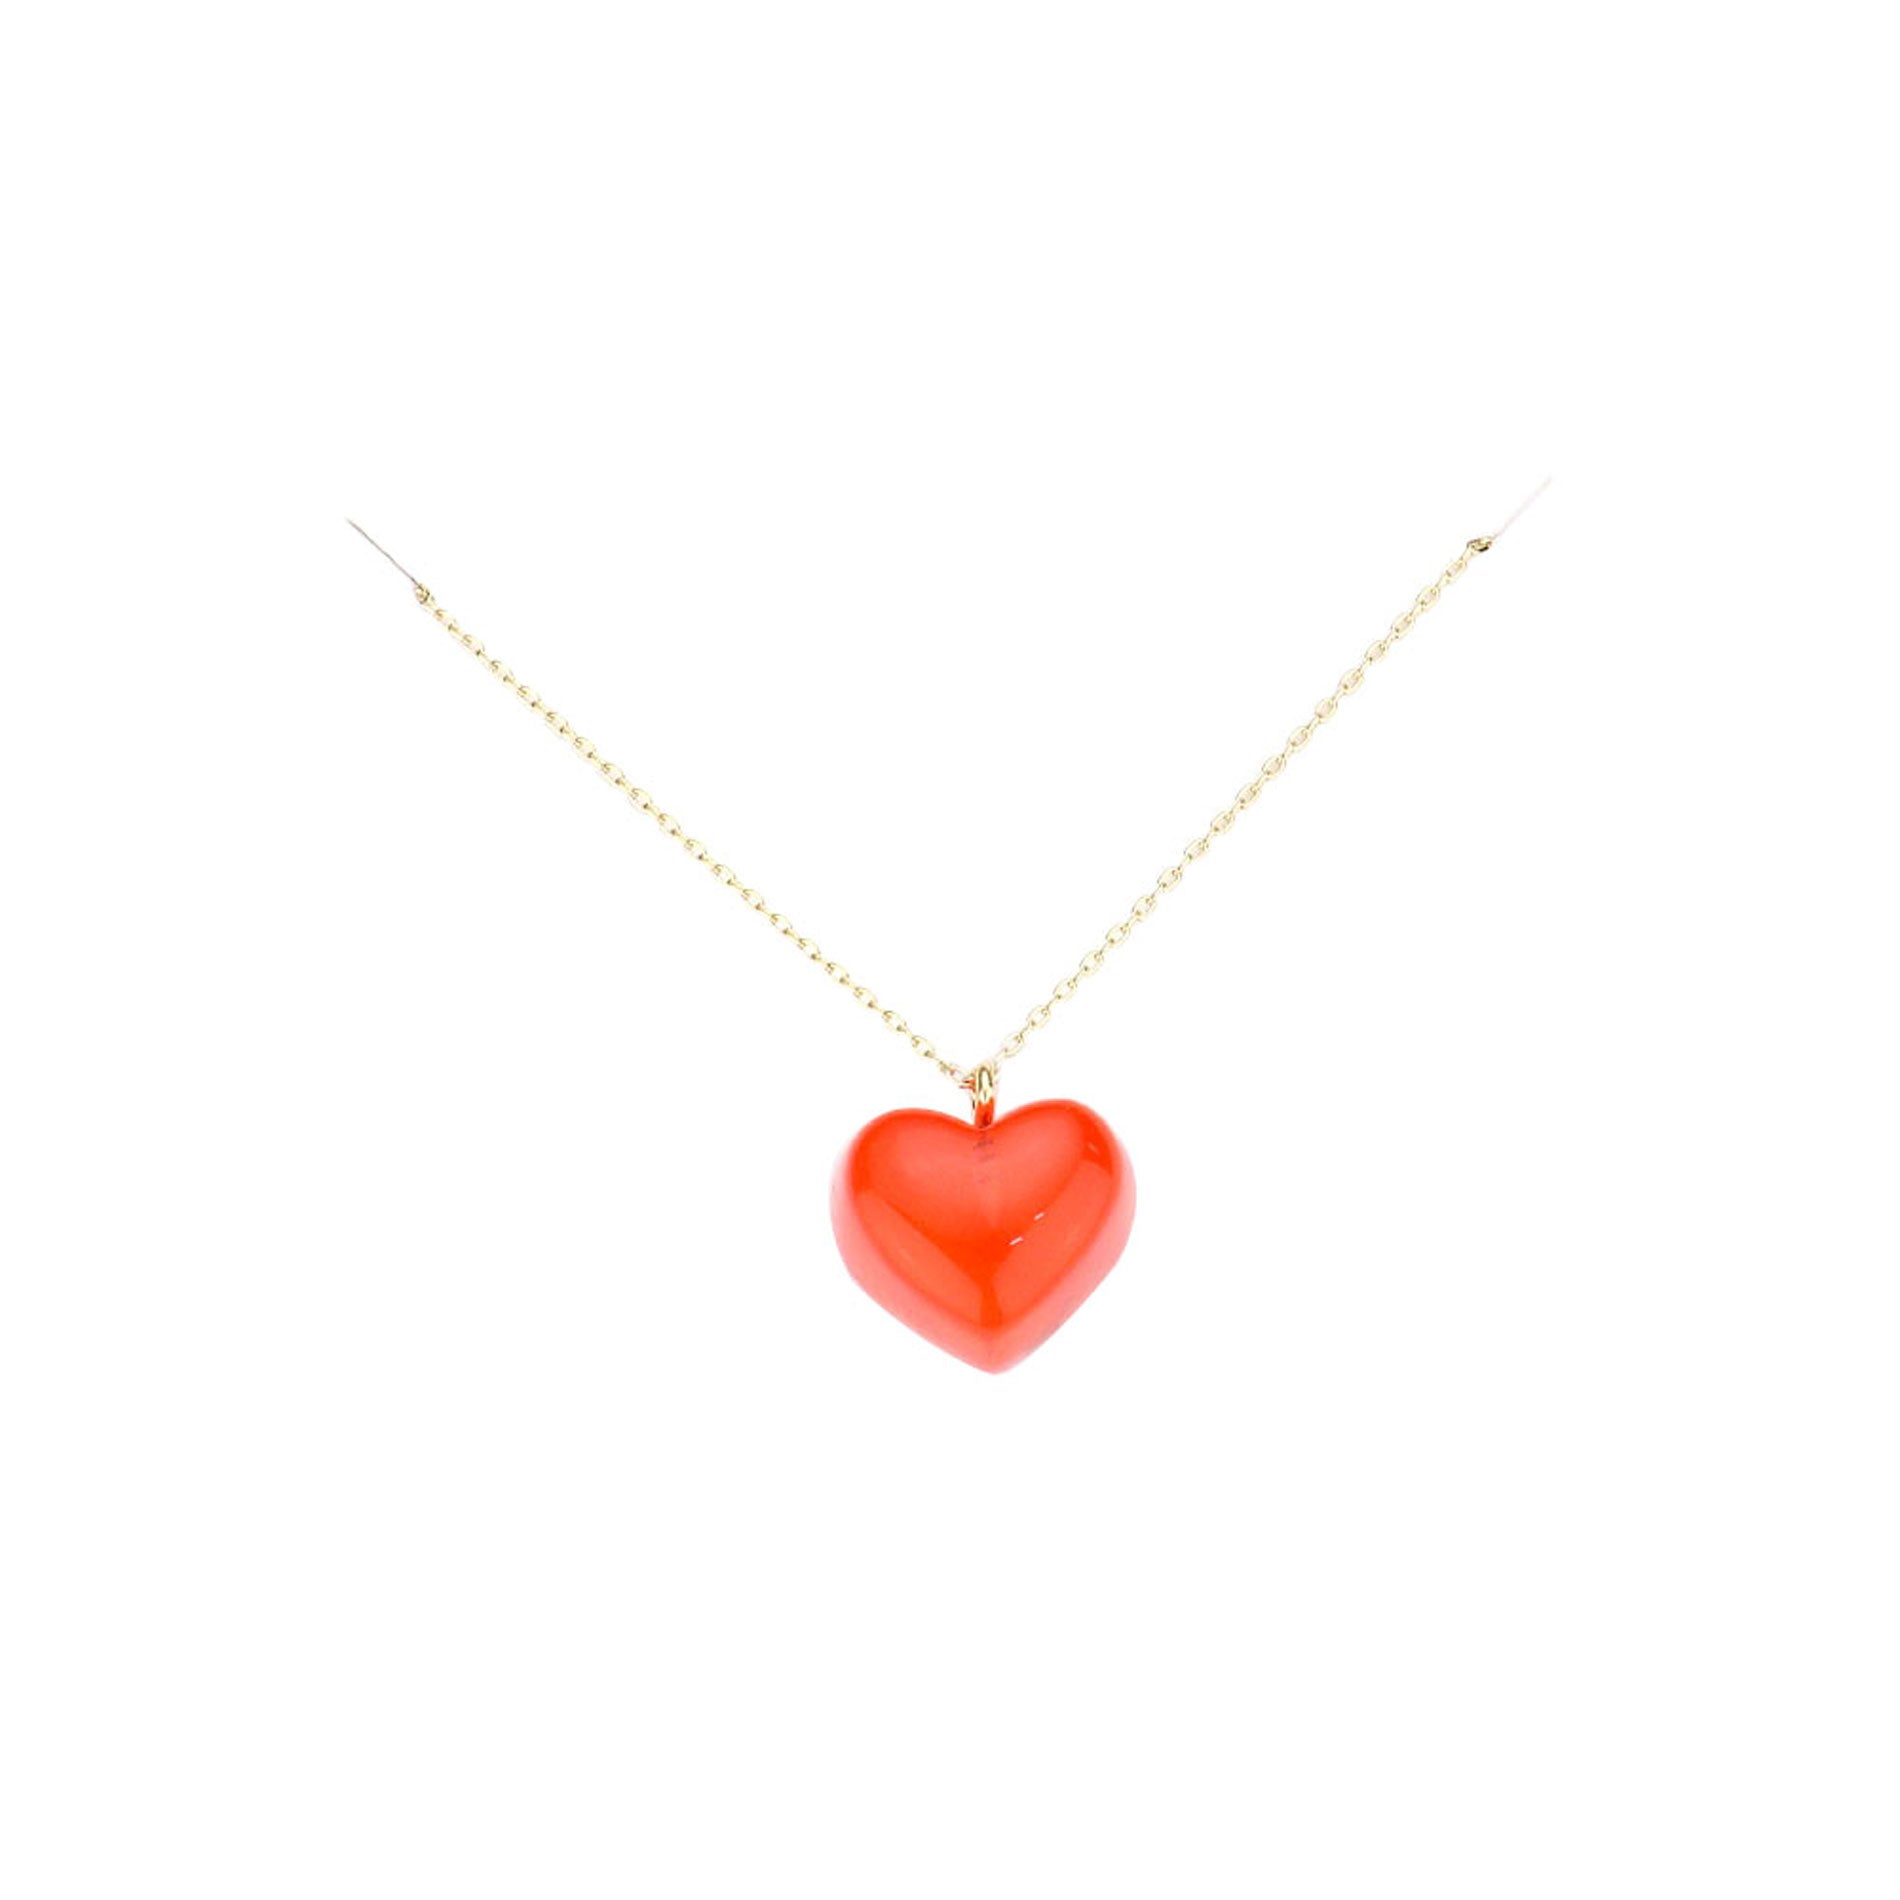 Red Brass Metal Lucite Heart Pendant Necklace, Get ready with these Lucite Heart Pendant Necklace, put on a pop of color to complete your ensemble. Perfect for adding just the right amount of shimmer & shine and a touch of class to special events. Perfect Birthday Gift, Anniversary Gift, Mother's Day Gift, Graduation Gift